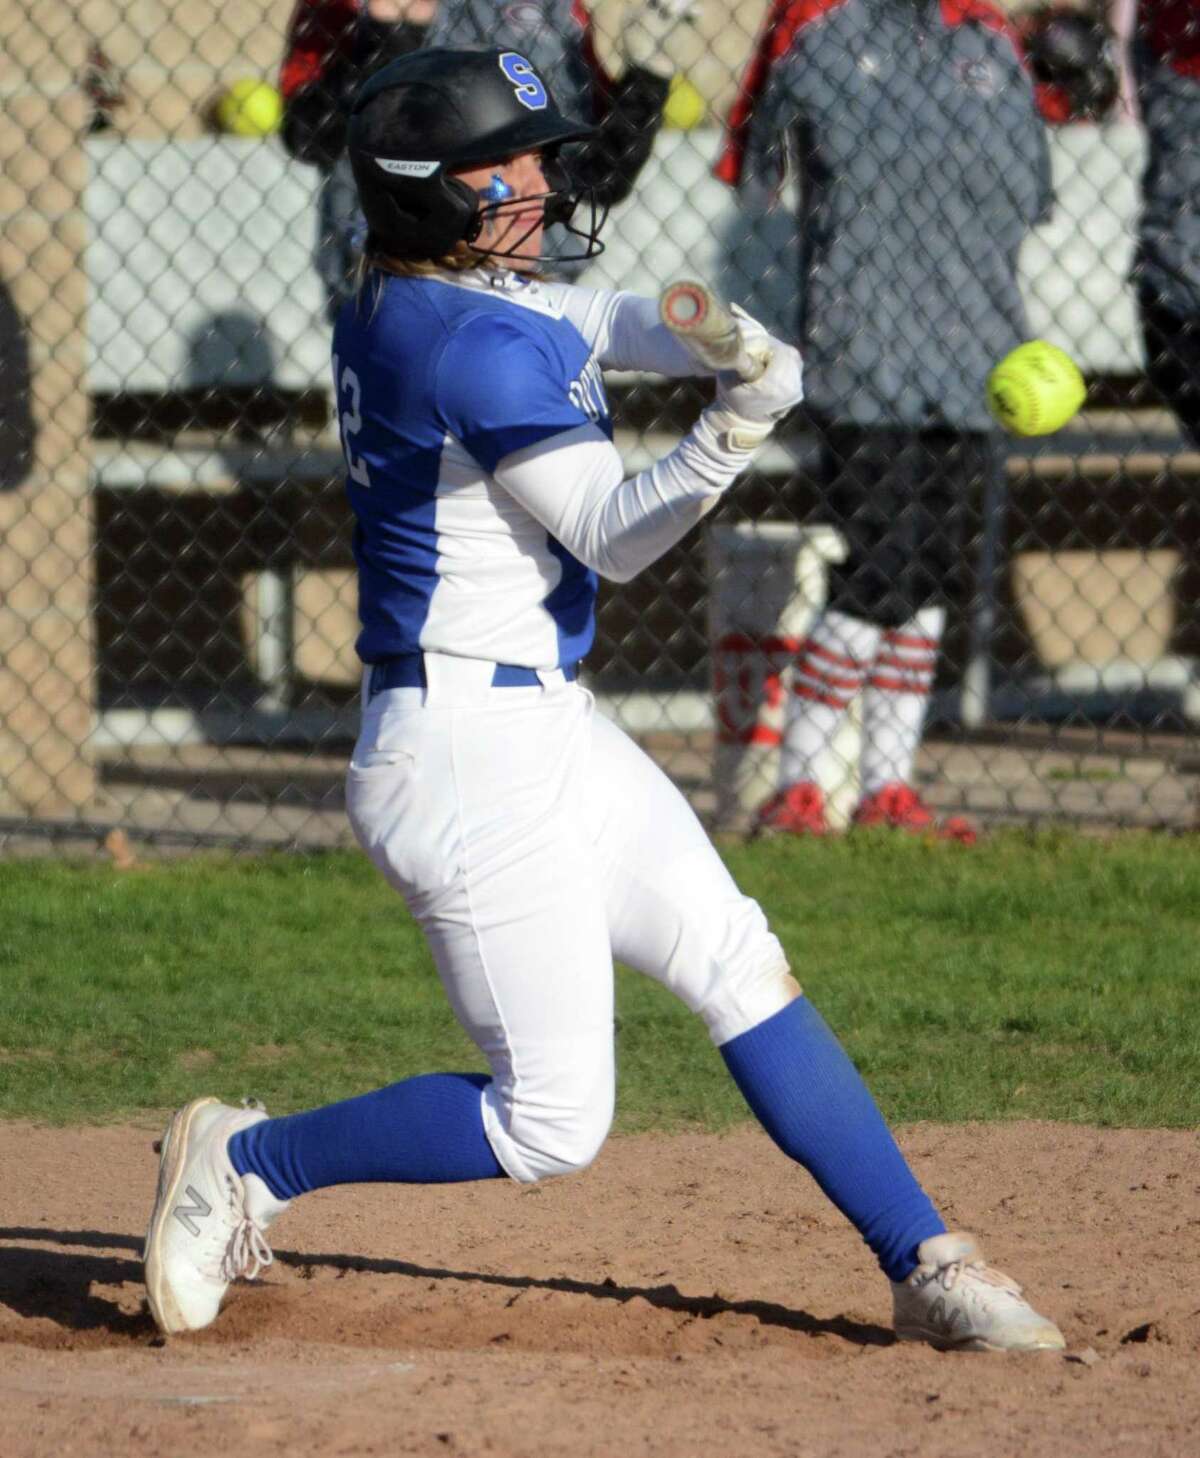 Ashlyn DeSaulniers of Southington lines a two-run single to left field in the sixth inning of the Blue Knights’ 14-1 victory over Cheshire on Wednesday.